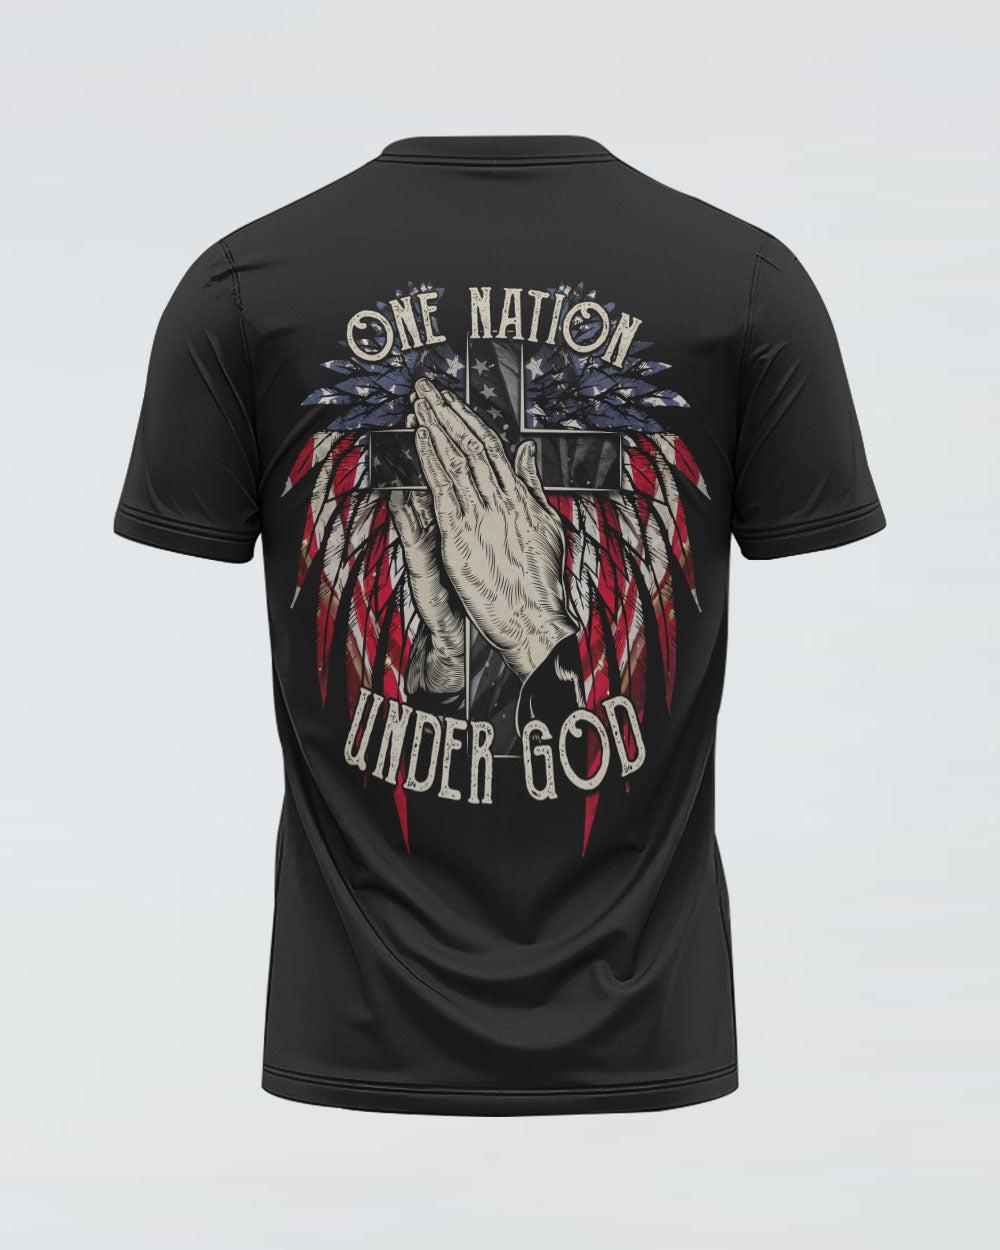 One Nation Under God Wings Hand Women's Christian Tshirt